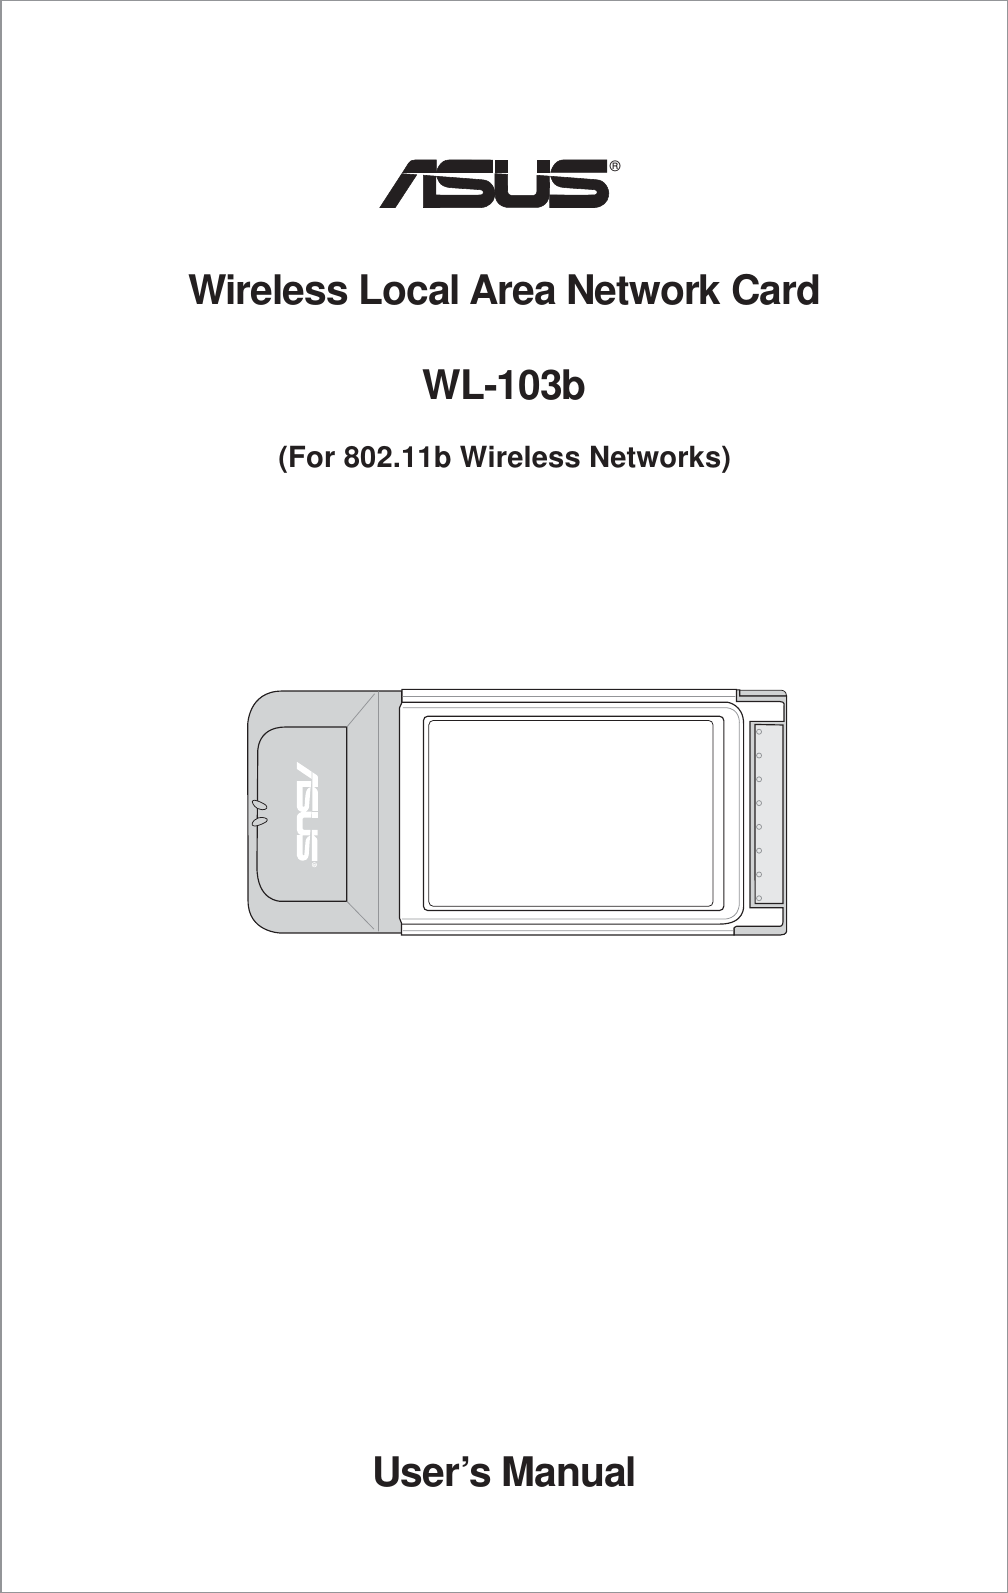 Wireless Local Area Network CardWL-103b(For 802.11b Wireless Networks)®User’s Manual